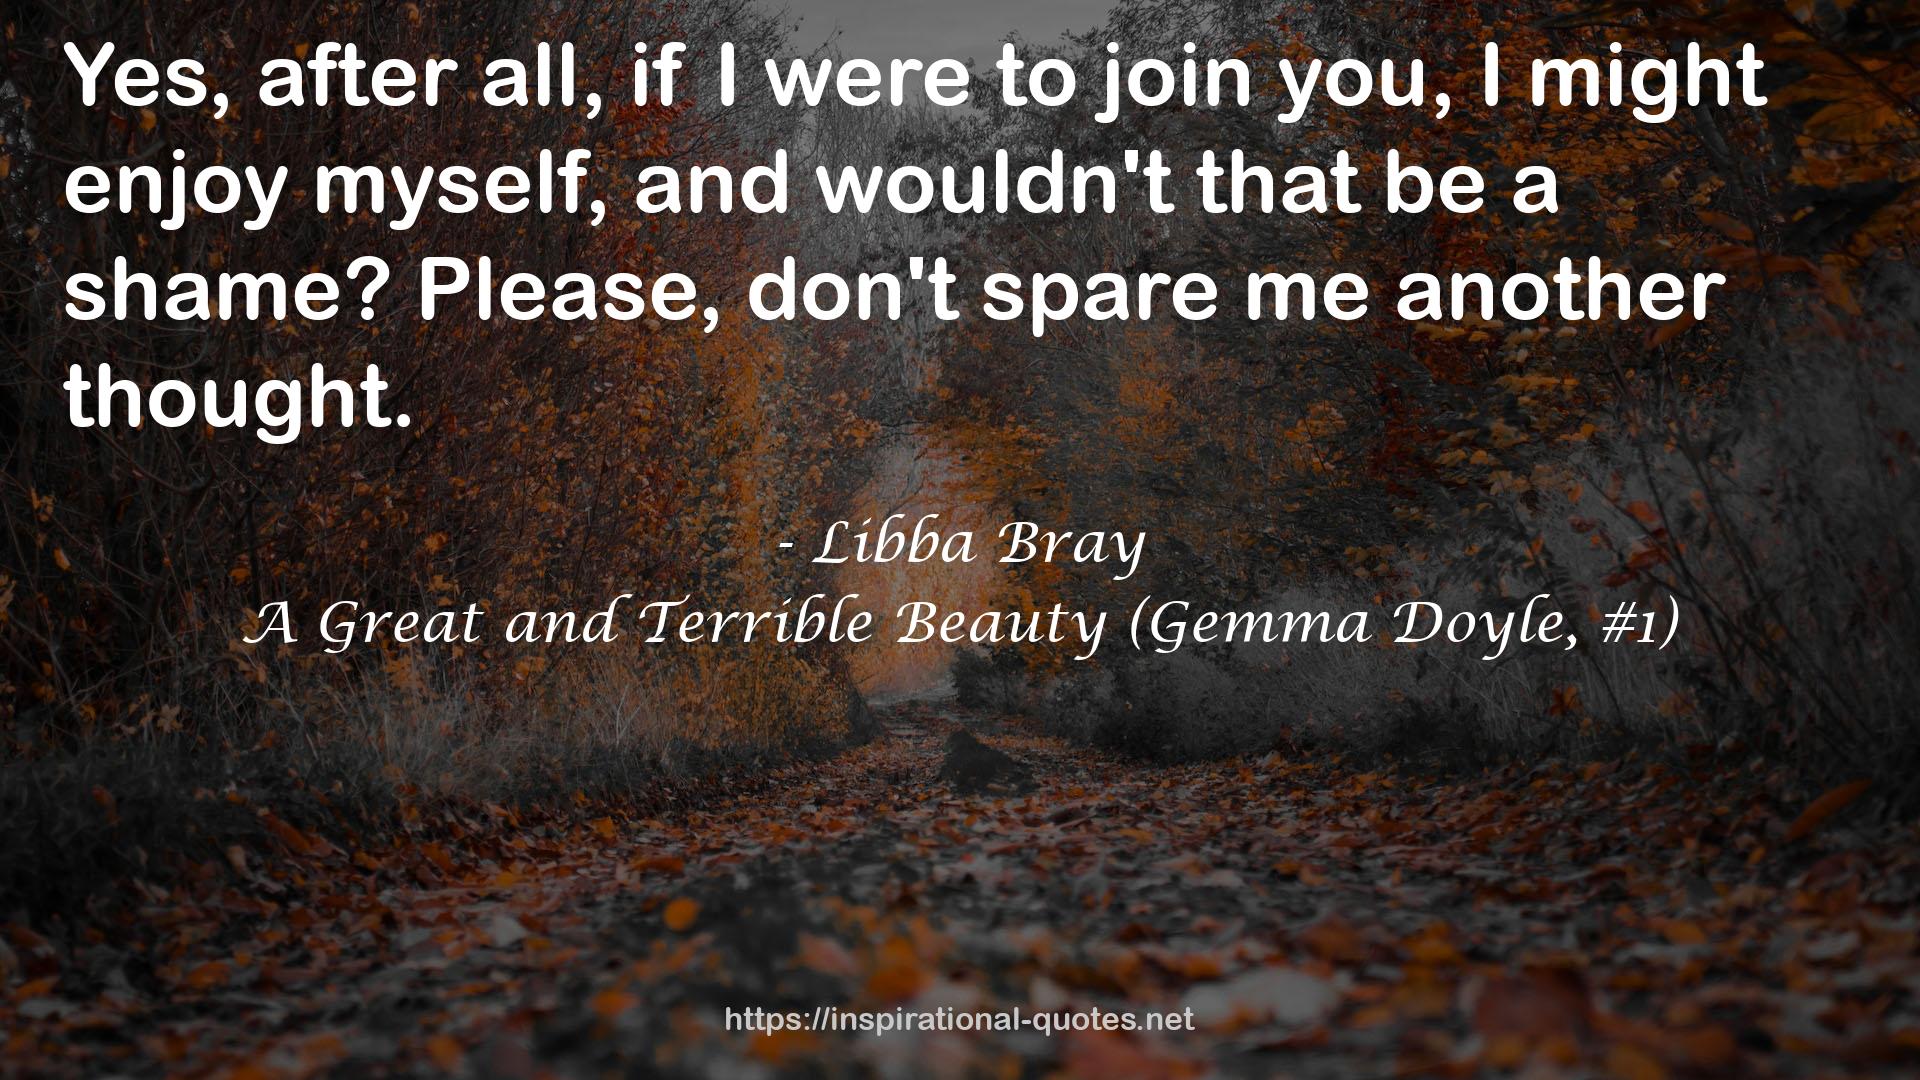 A Great and Terrible Beauty (Gemma Doyle, #1) QUOTES